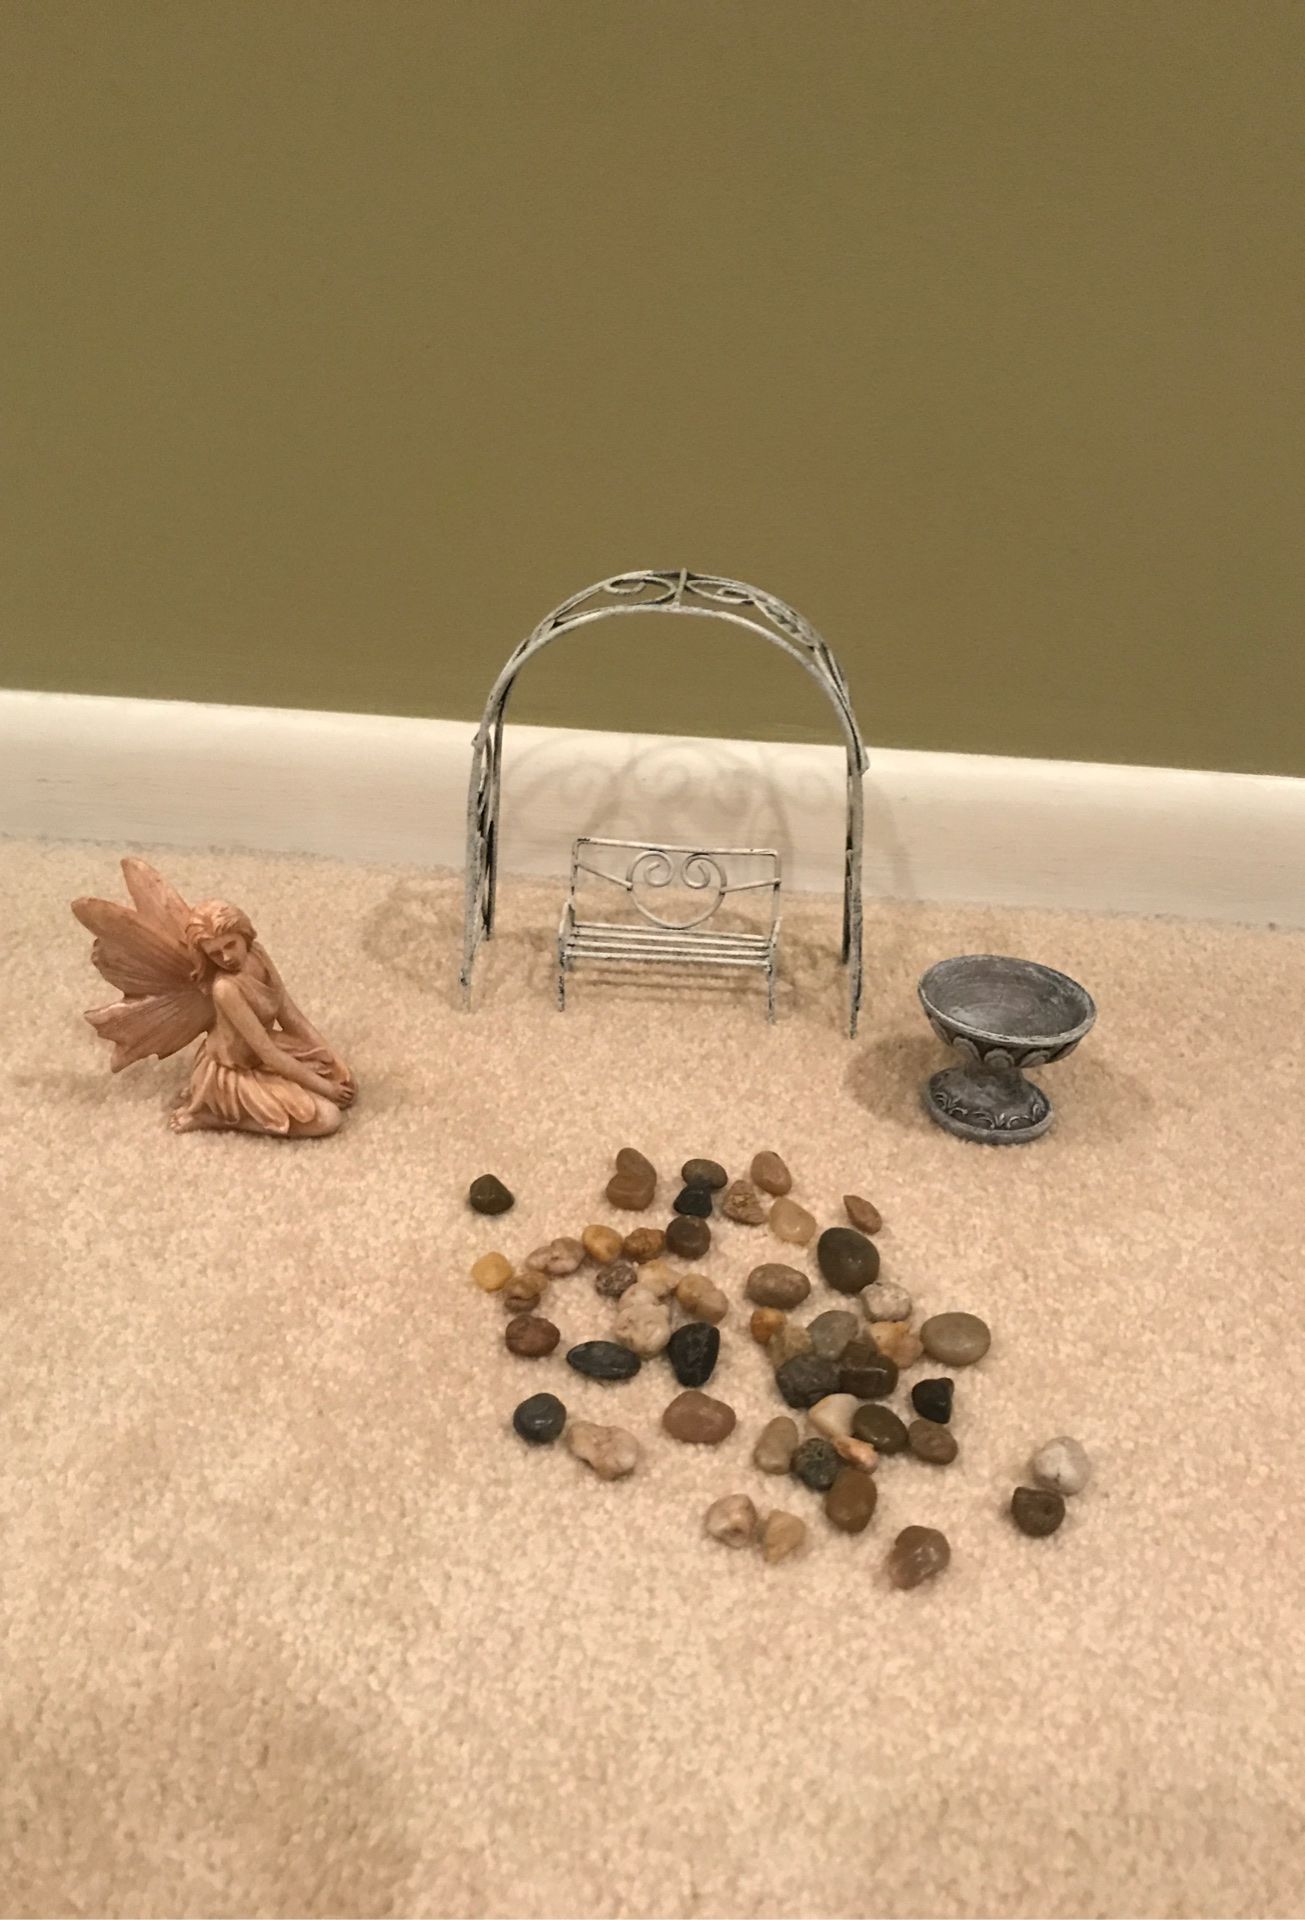 Mini Fairy Garden. In good condition. Local porch pick up only.